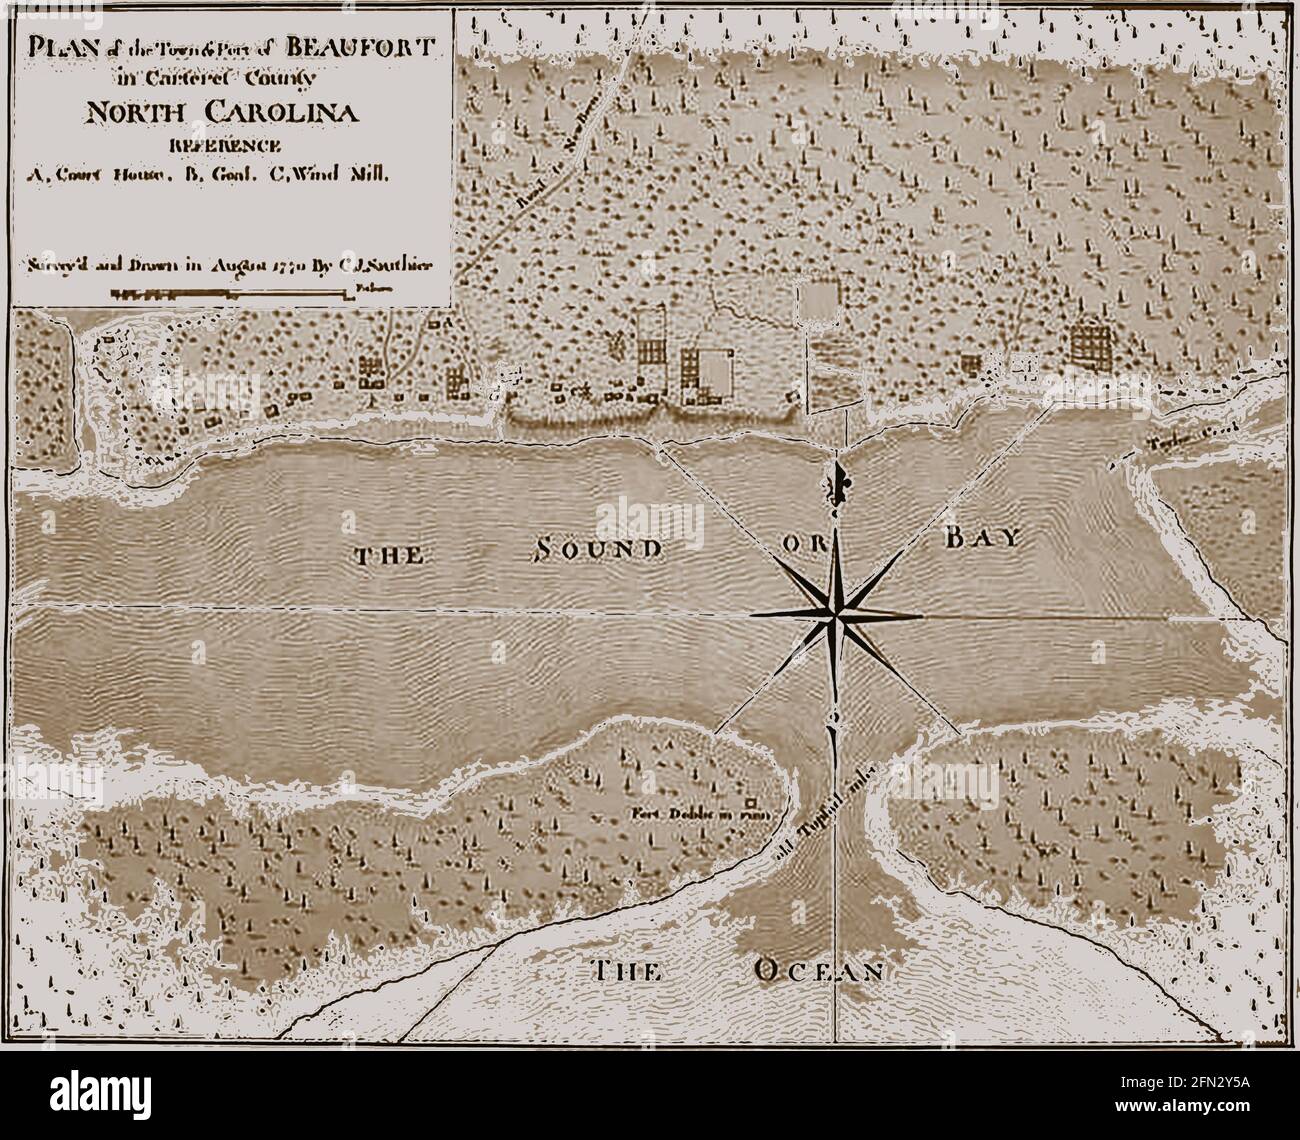 1770 An early plan or map of Beaufort,  Carteret County, North Carolina, USA as it was in its early days showing location of the court house, gaol and windmill as well as building plots. A notable historic fact is that  in June 1718 Blackbeard the pirate ran his flagship, the Queen Anne's Revenge and his sloop Adventure aground close to the  present-day Beaufort Inlet Stock Photo